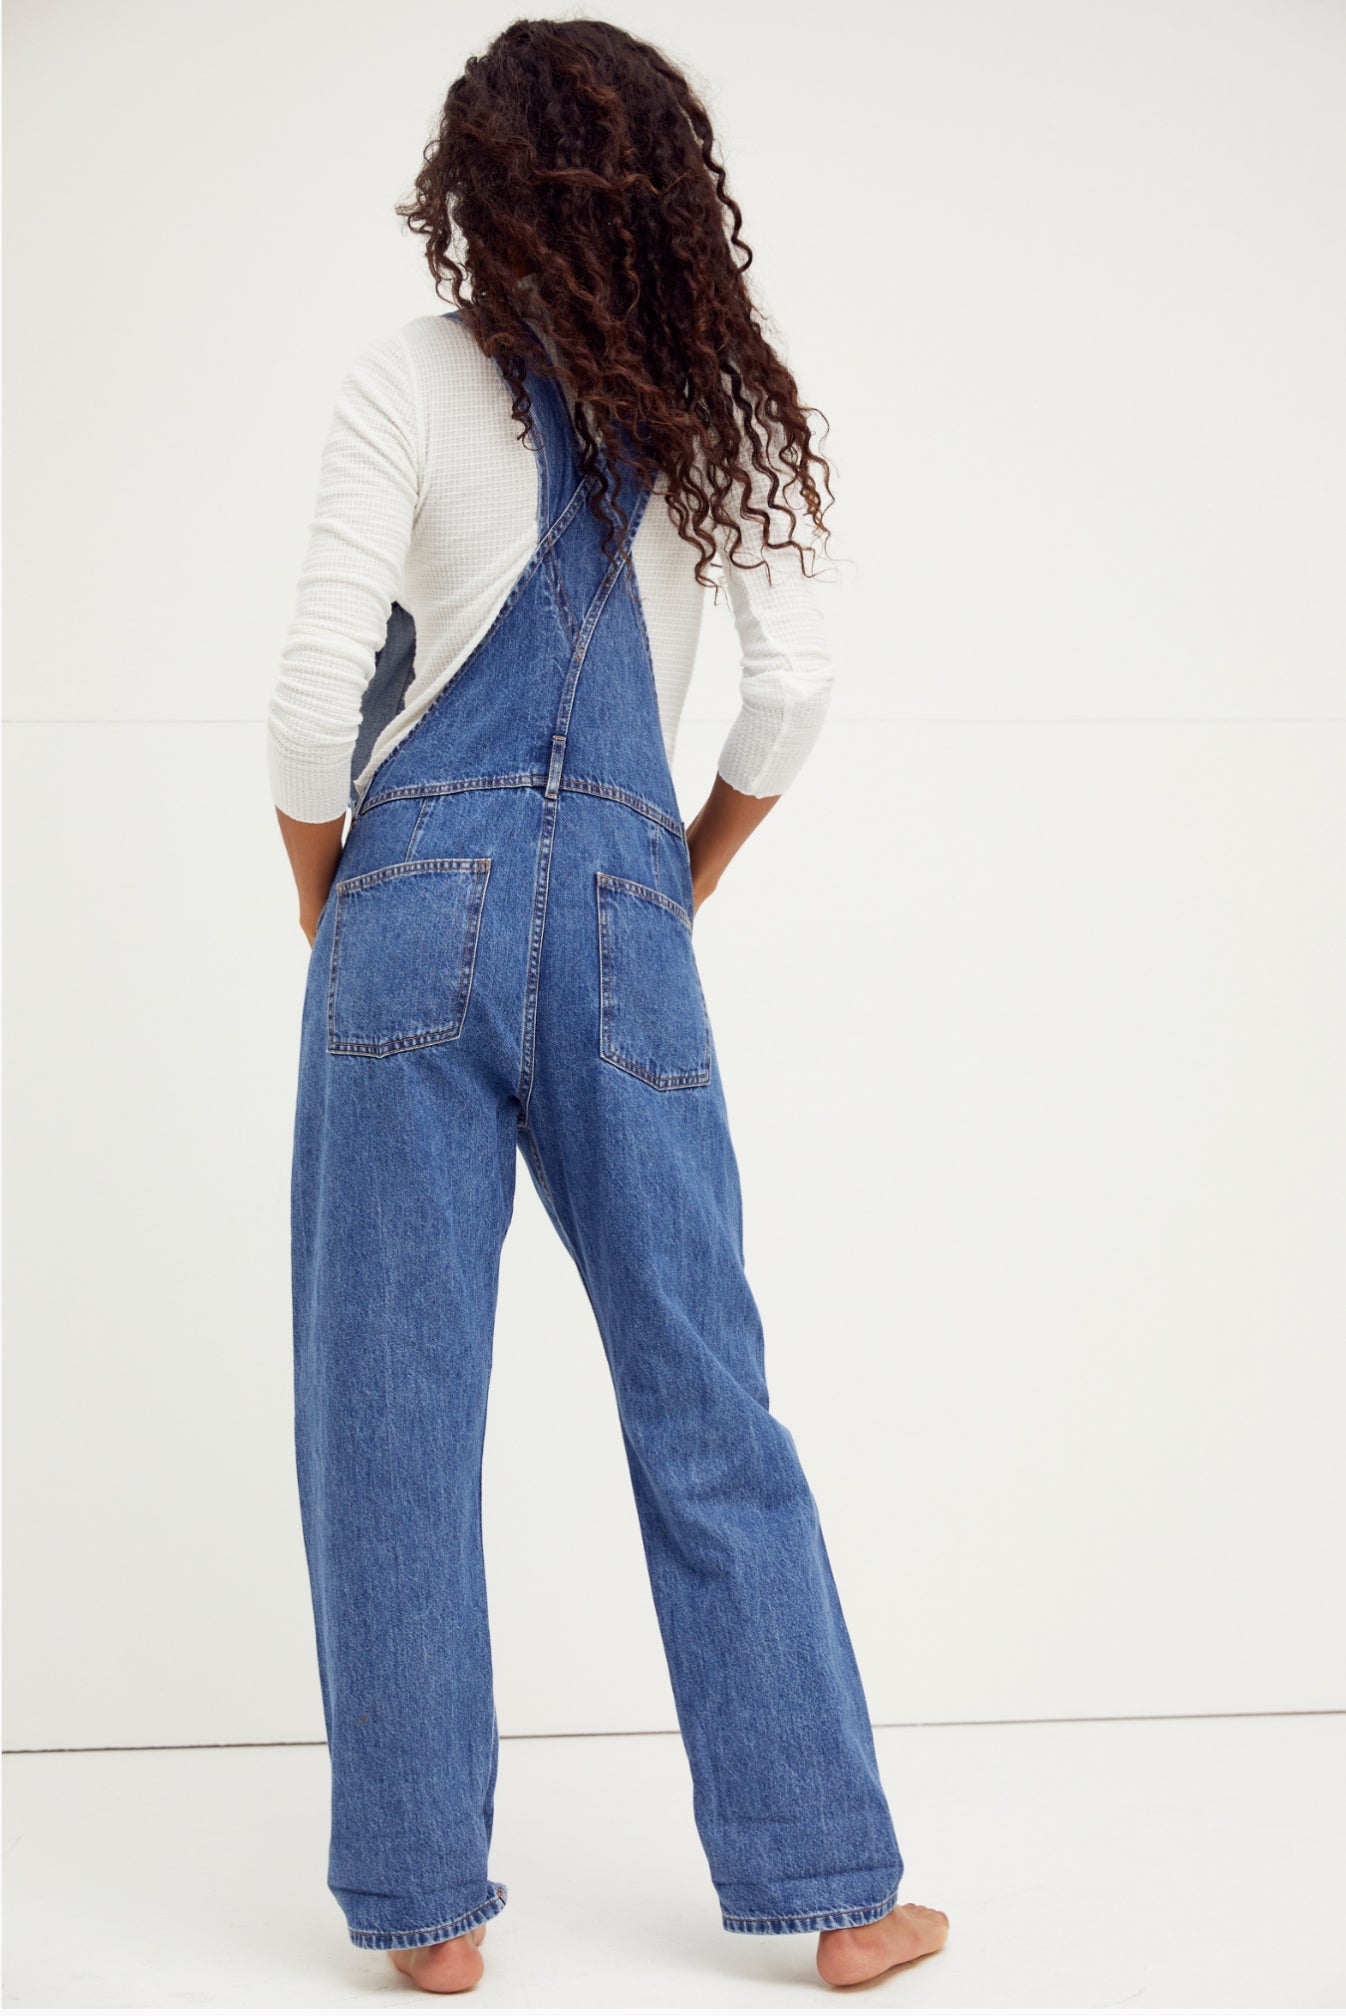 We The Free Ziggy Denim Overalls by Free People - Blue Sky Fashions & Lingerie